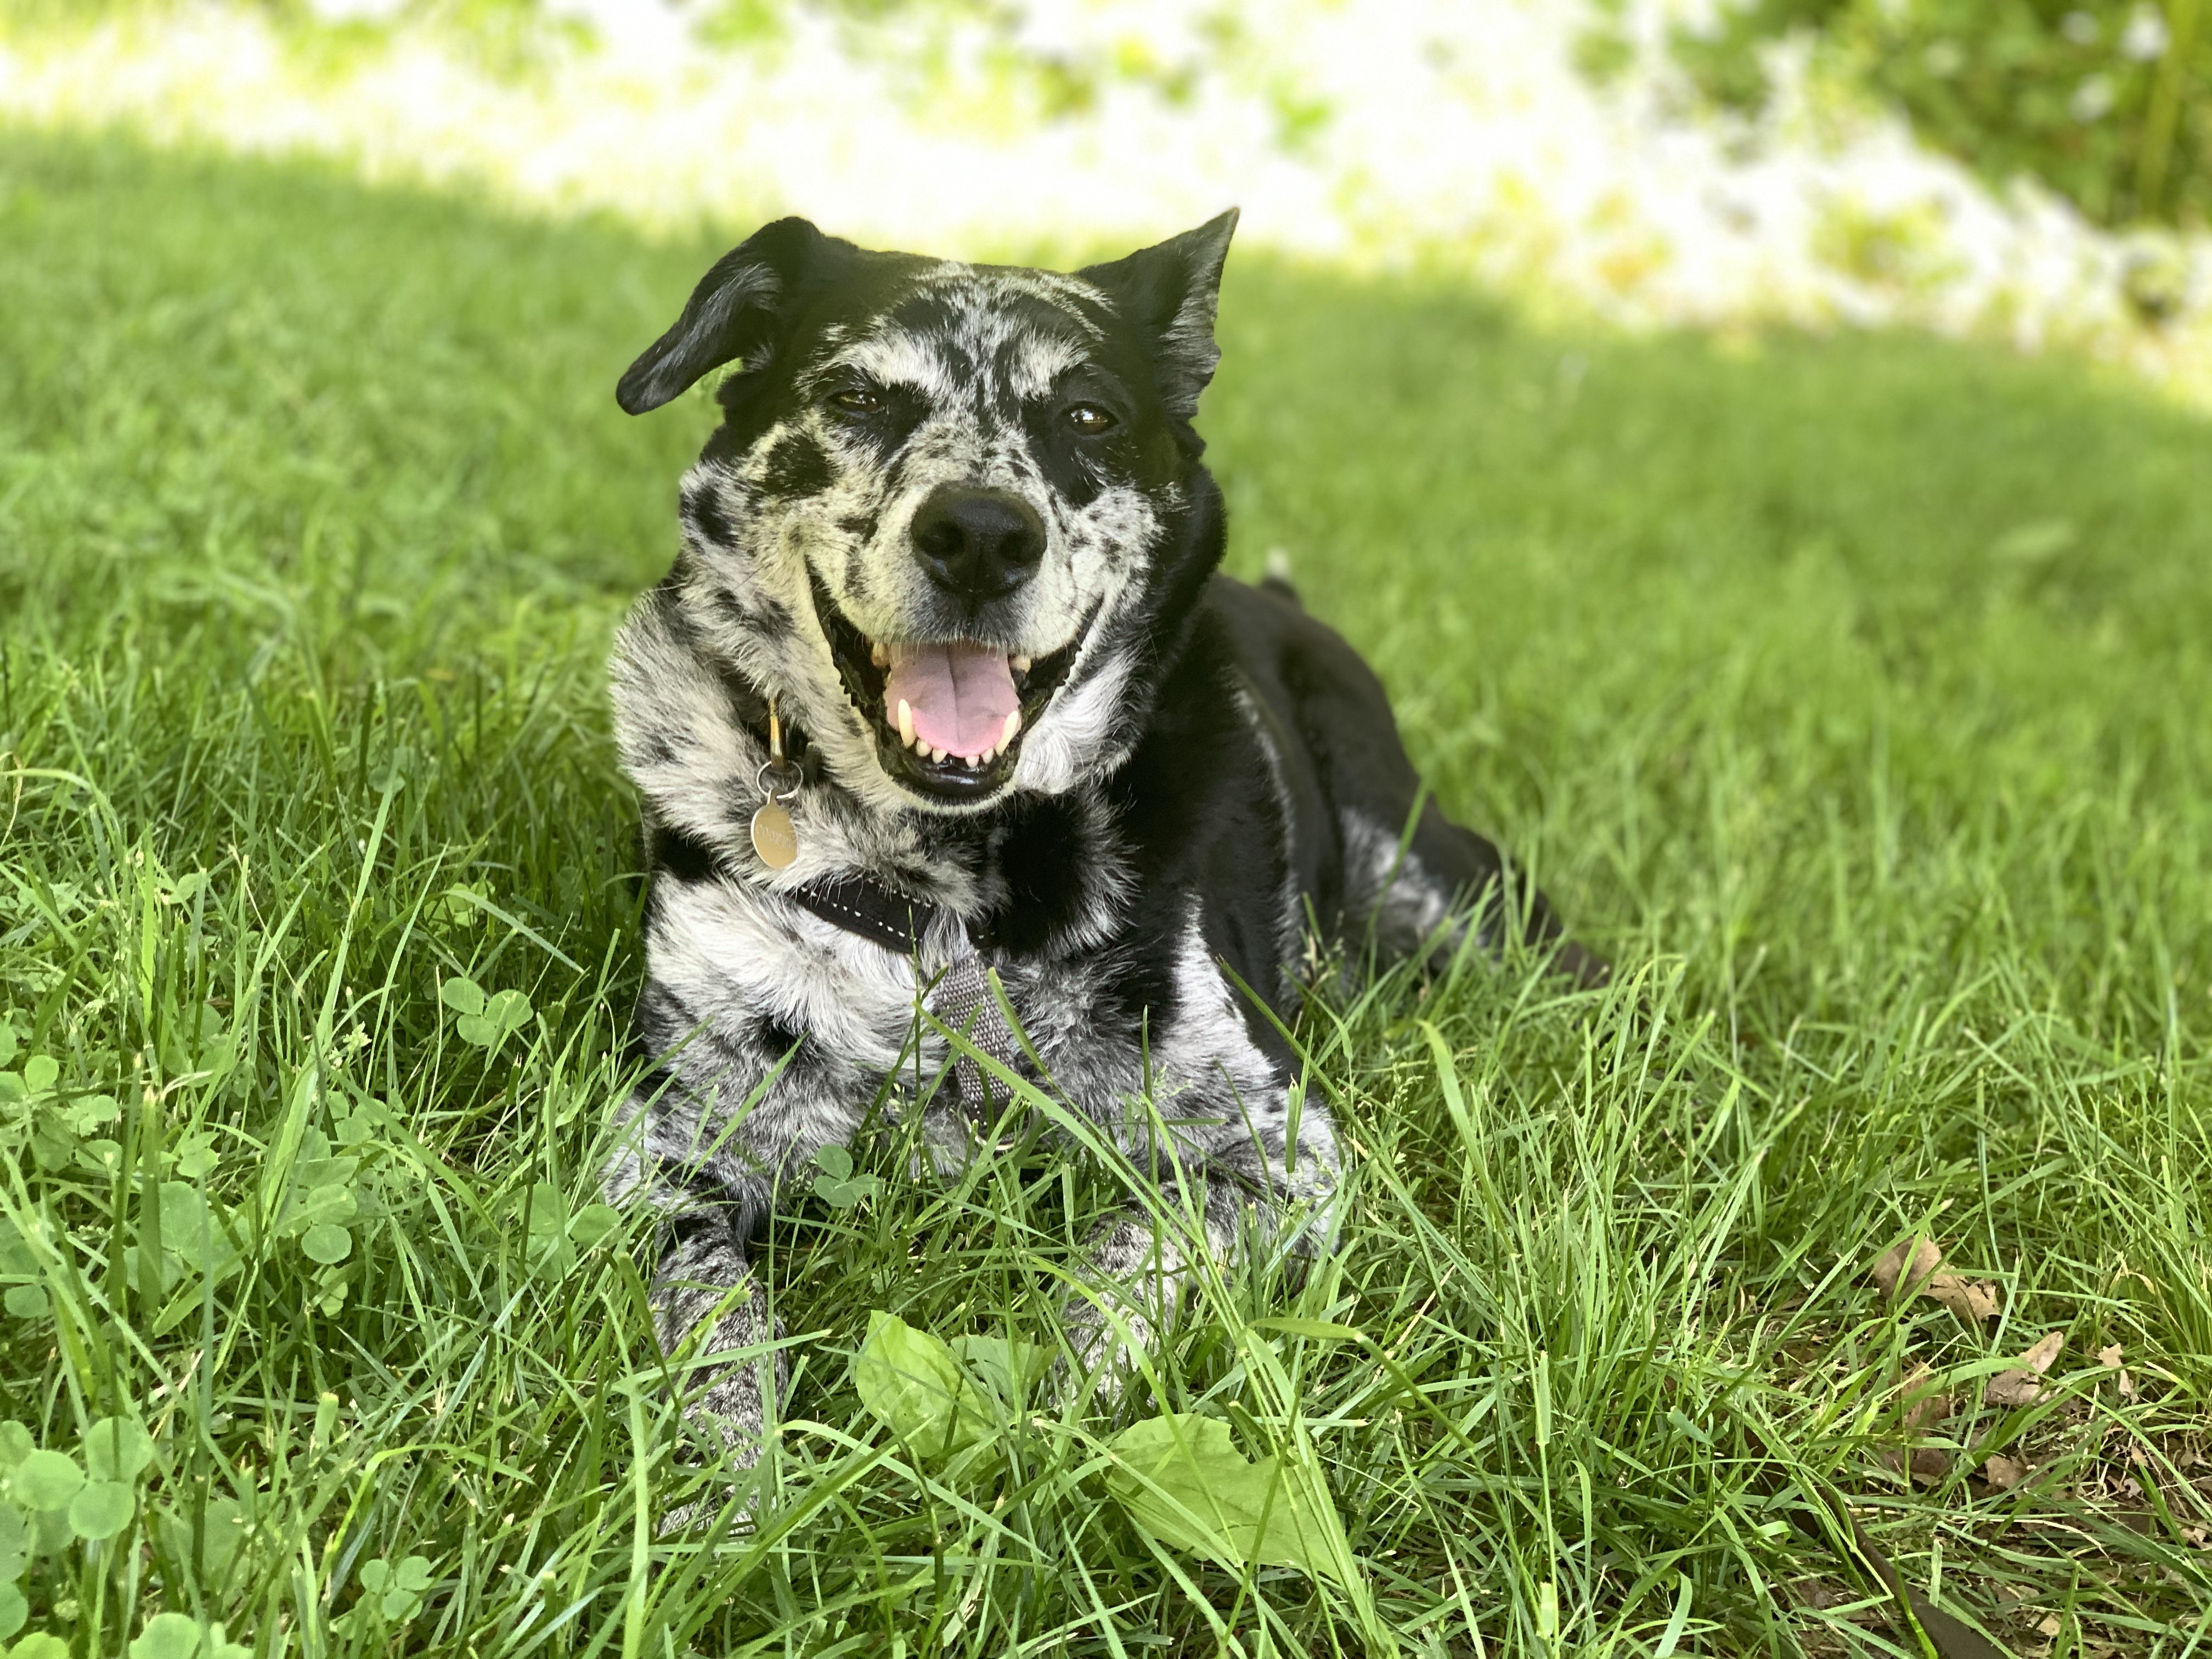 Cooper in the grass